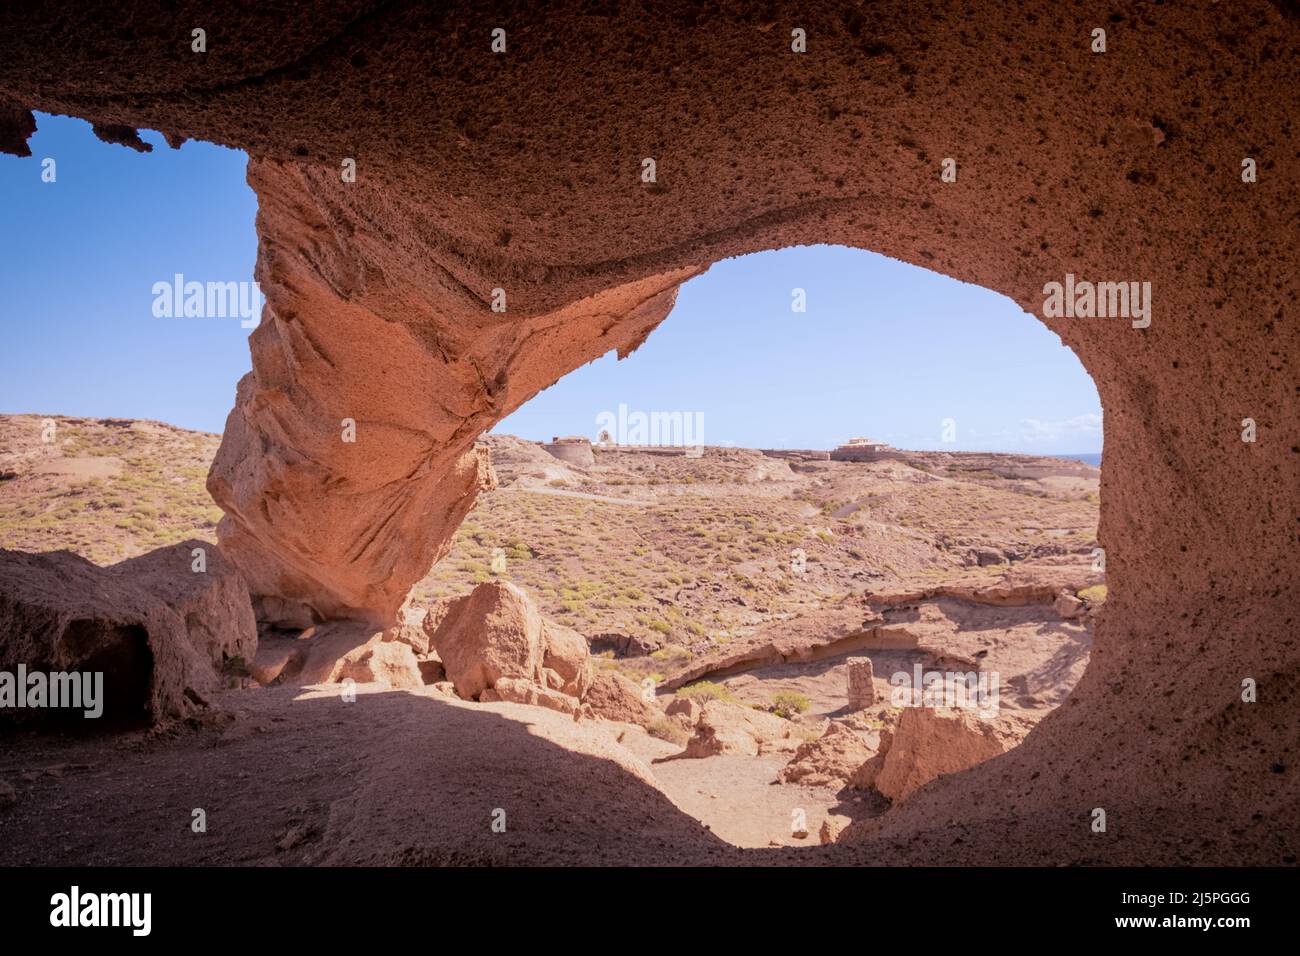 Impressive rock formation in Tenerife south, named Arco de Tajao with it's impressive arch. Stock Photo